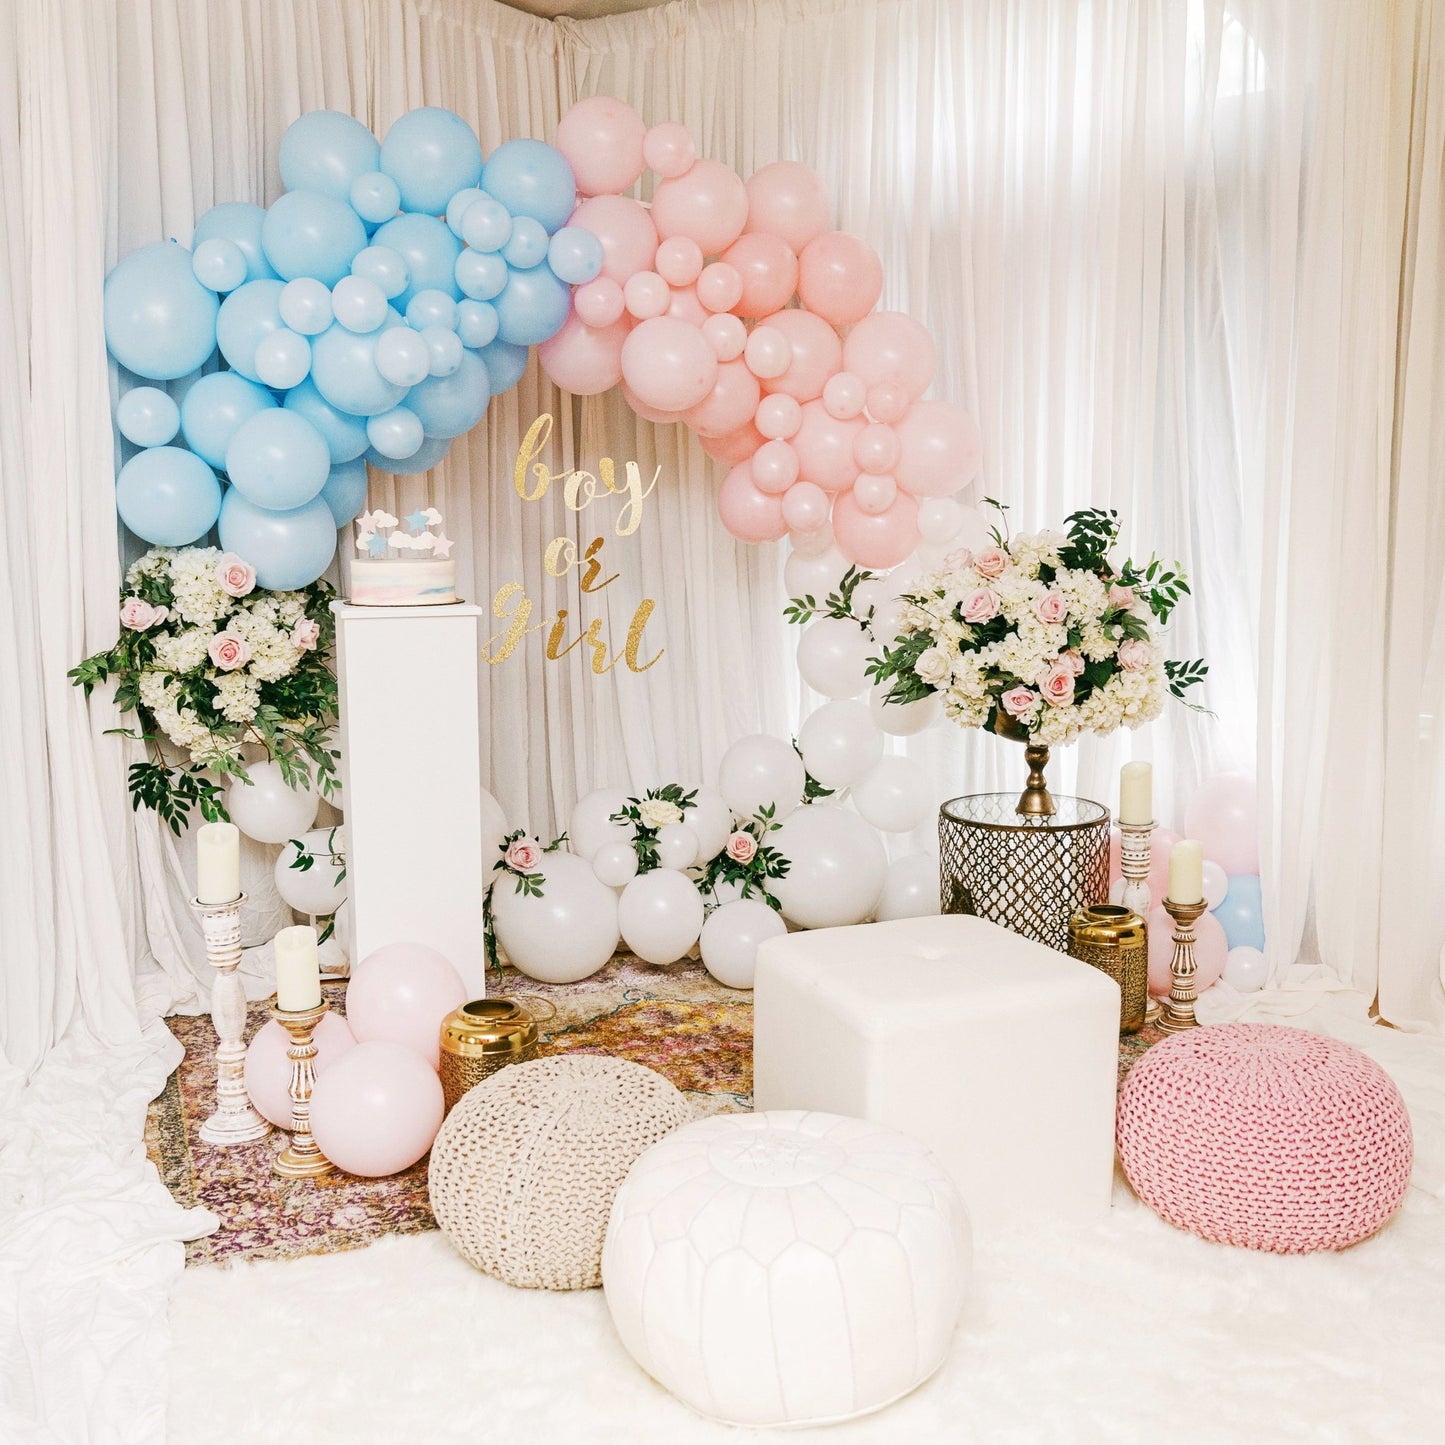 Premium Pastel Blue Latex Balloon Packs (5", 11”, 16”, 24”, and 36”) - Ellie's Party Supply